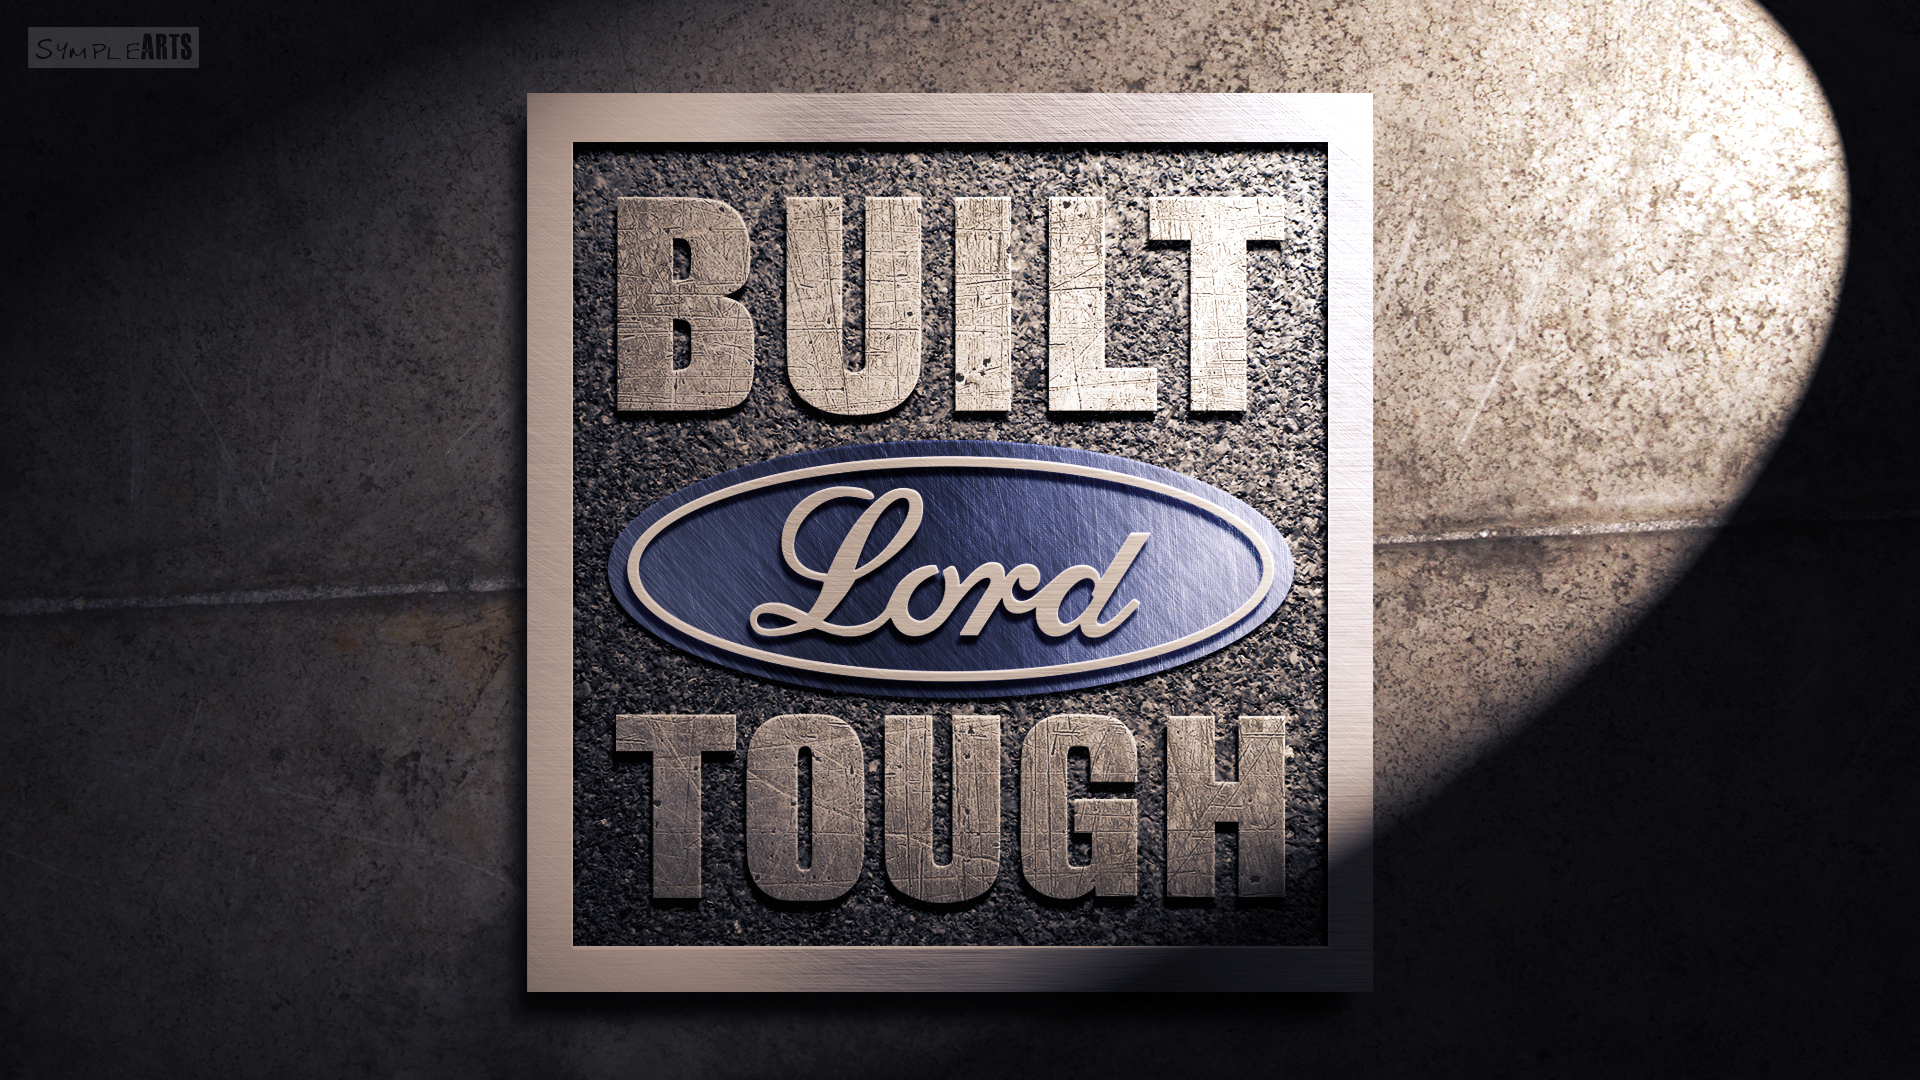 Built Ford Tough Iphone Wallpaper - image #468